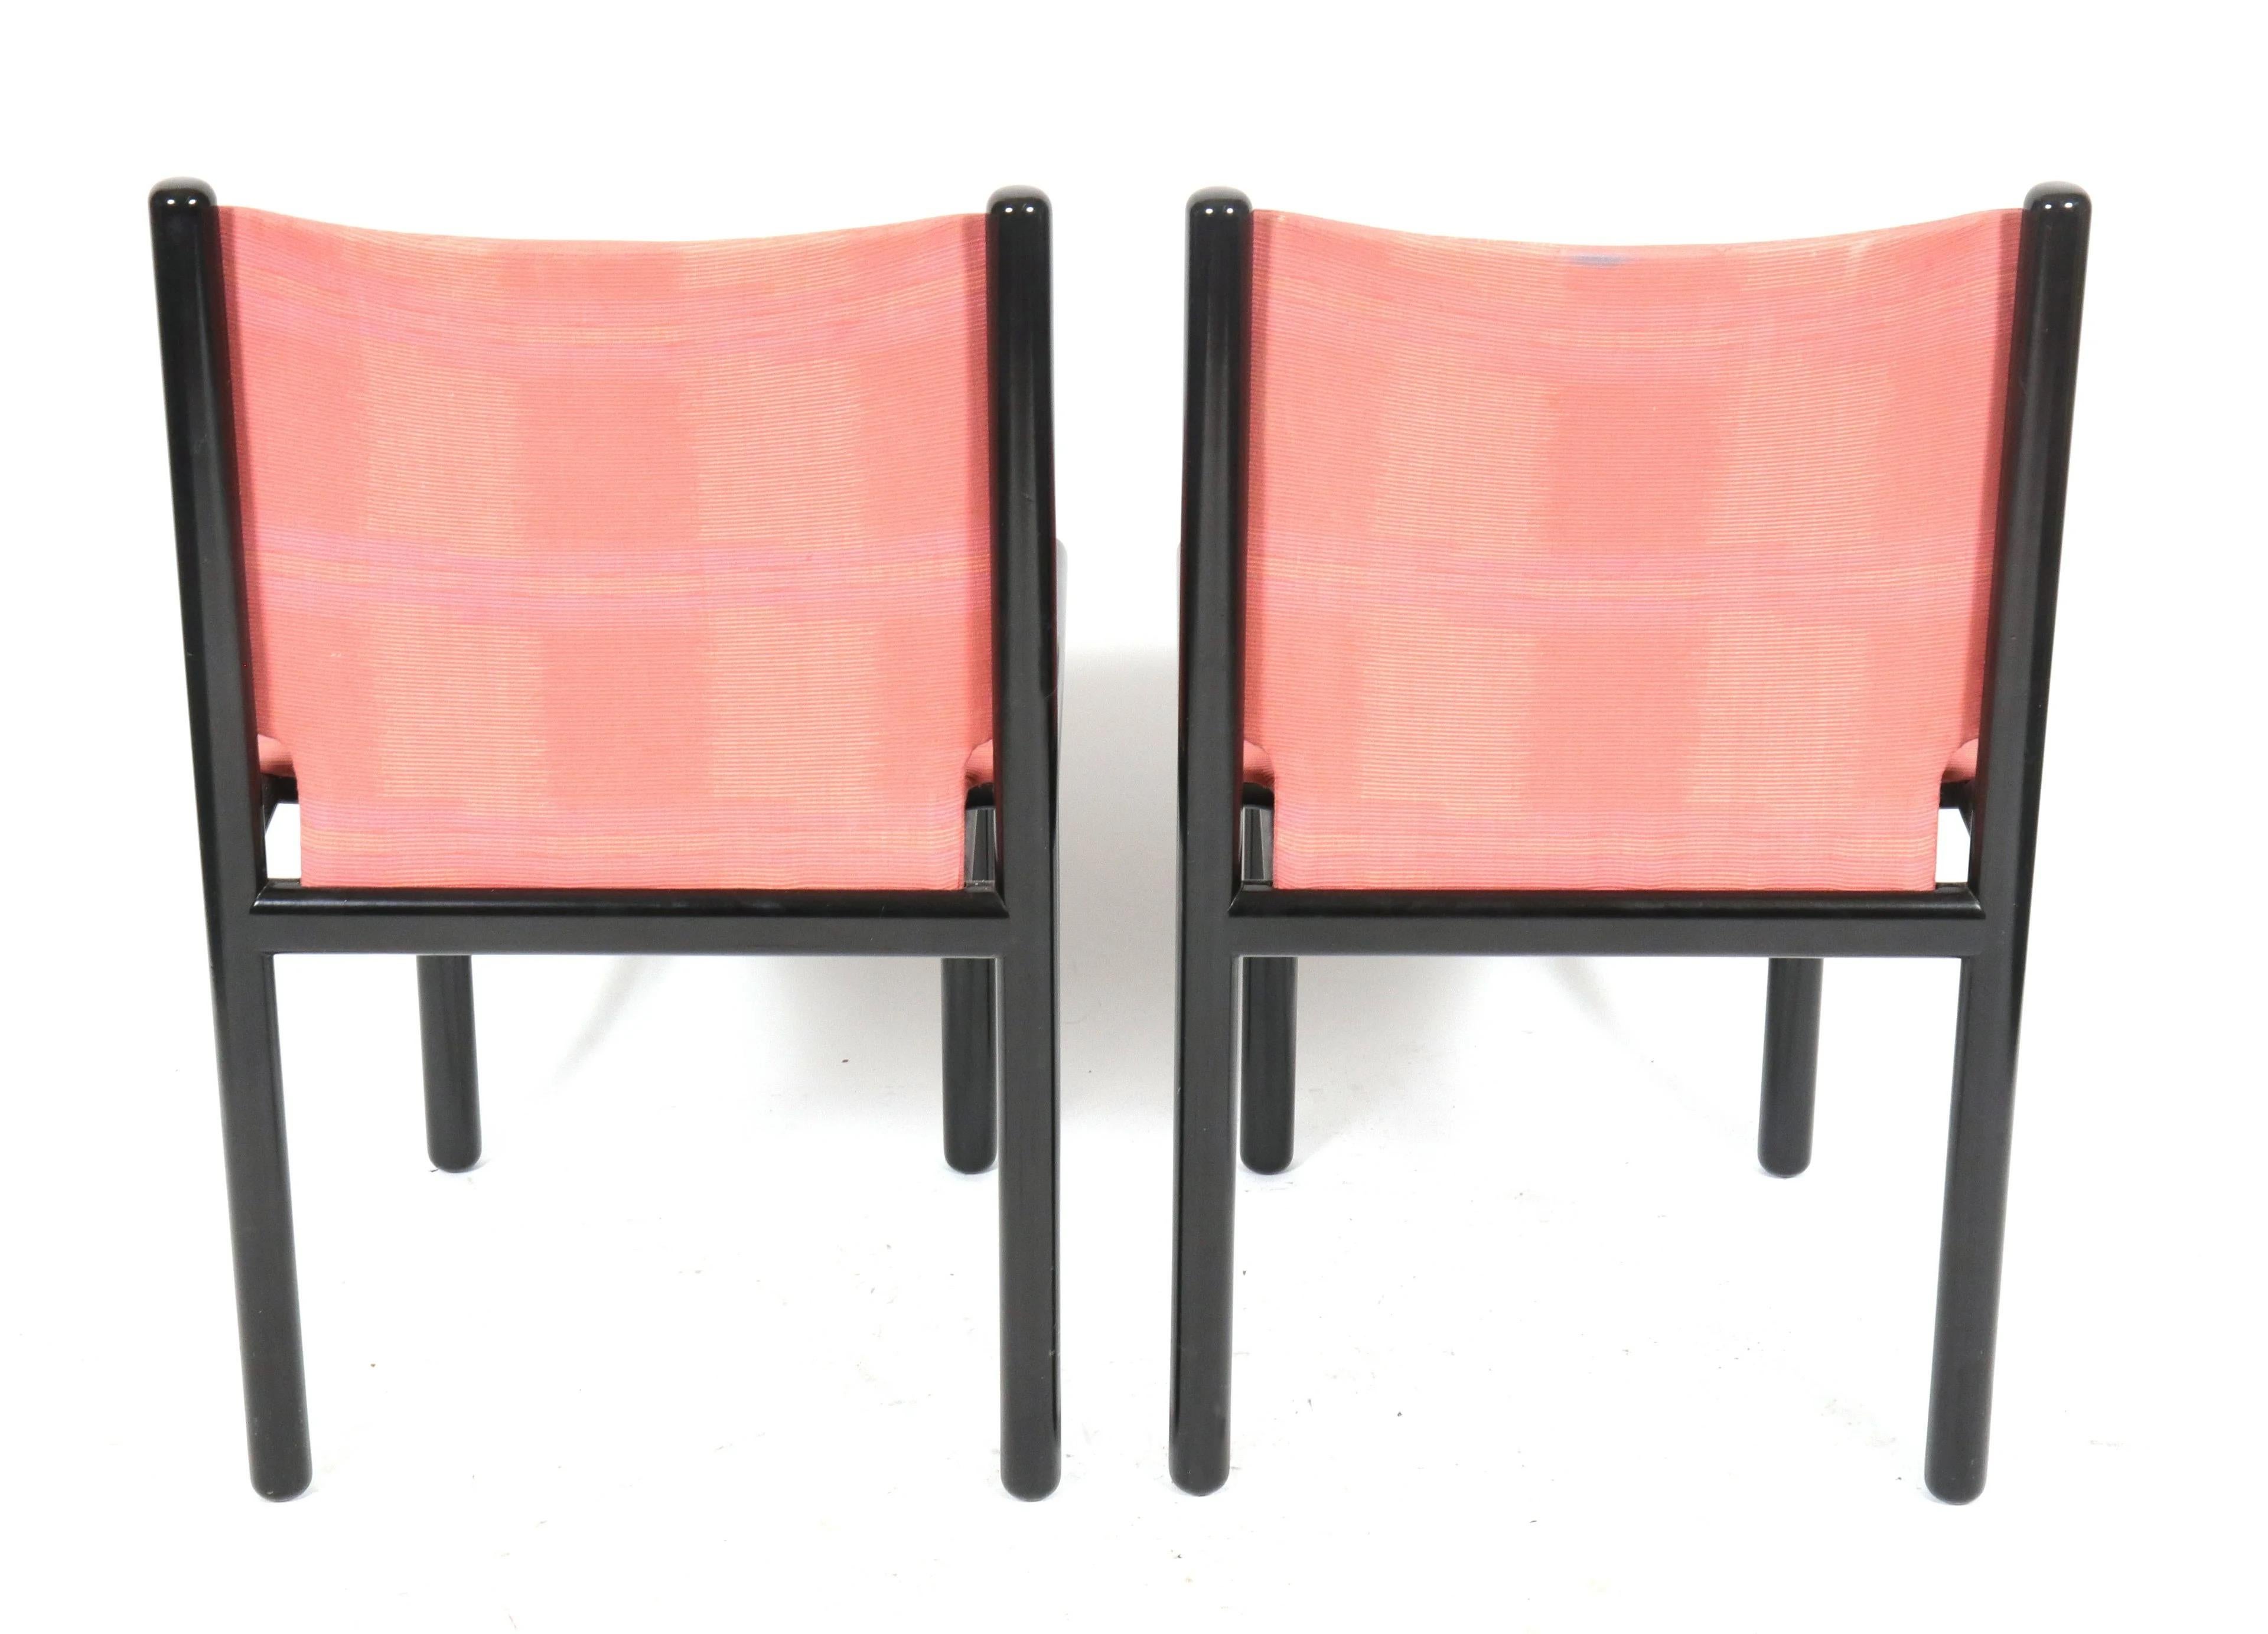 Modern Gianfranco Frattini for Cassina Dining Chair, Black Lacquered Frame, Pink, 1985